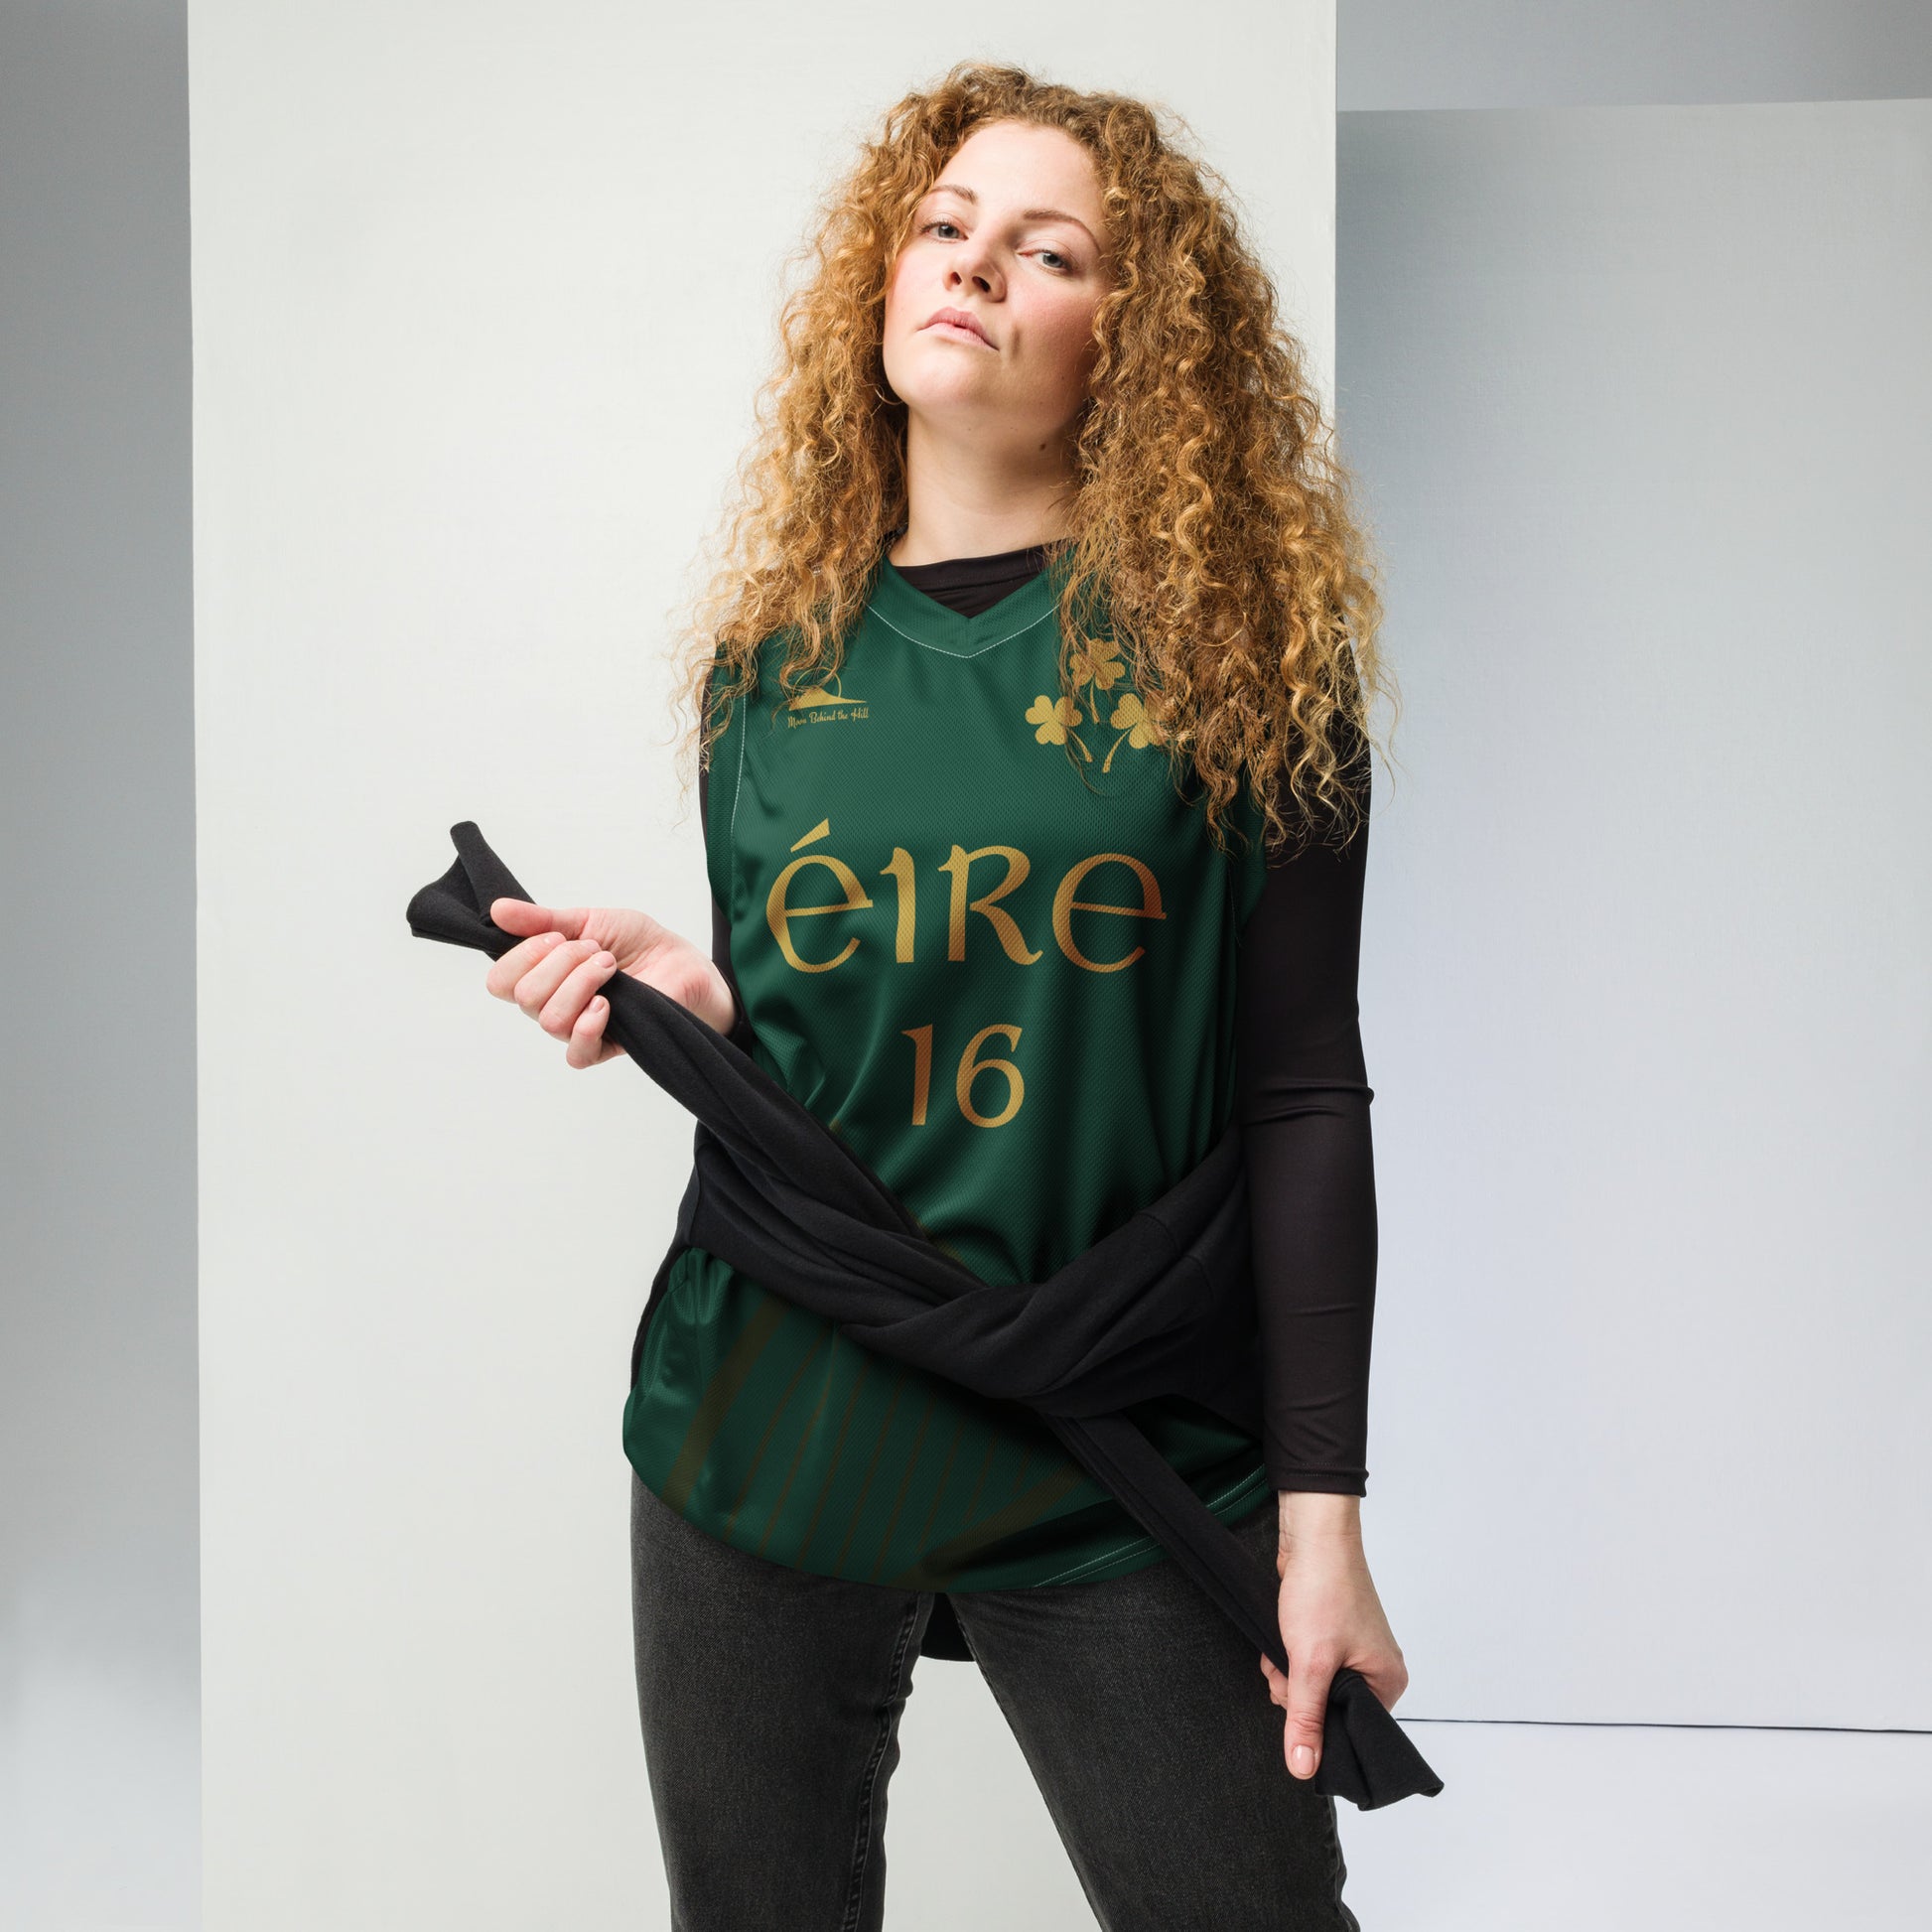 Éire #16 Green Recycled Unisex Basketball Jersey - Designed by Moon Behind The Hill Available to Buy at a Discounted Price on Moon Behind The Hill Online Designer Discount Store